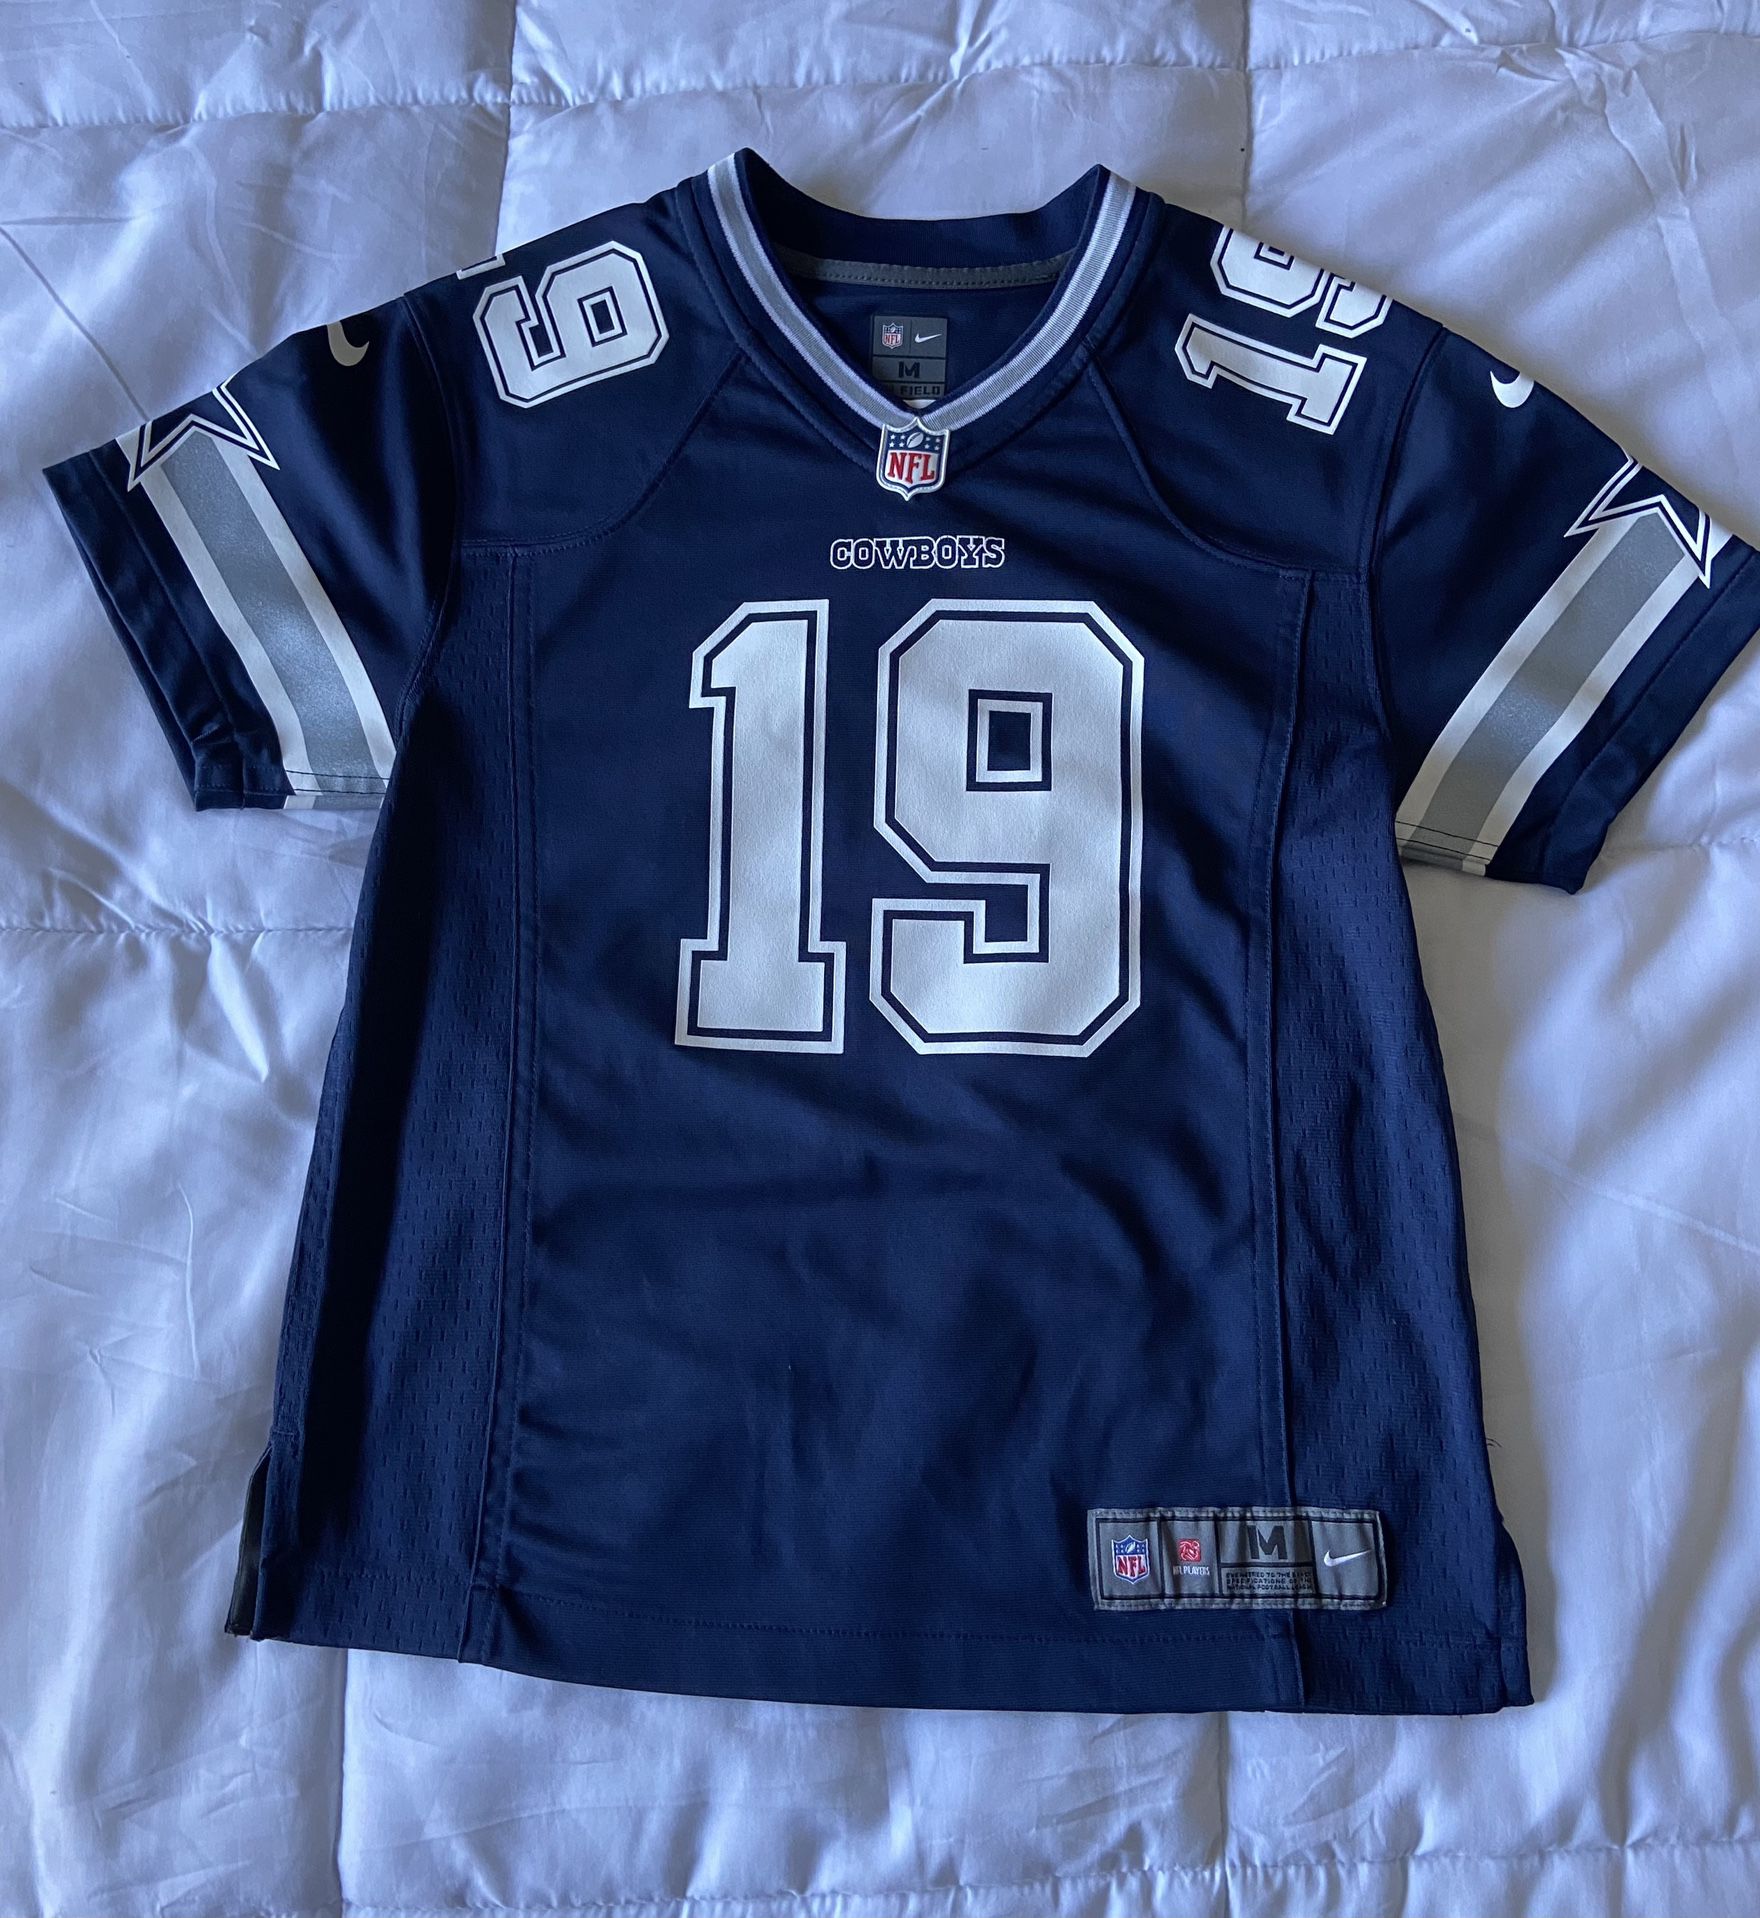 Youth NFL Jersey 